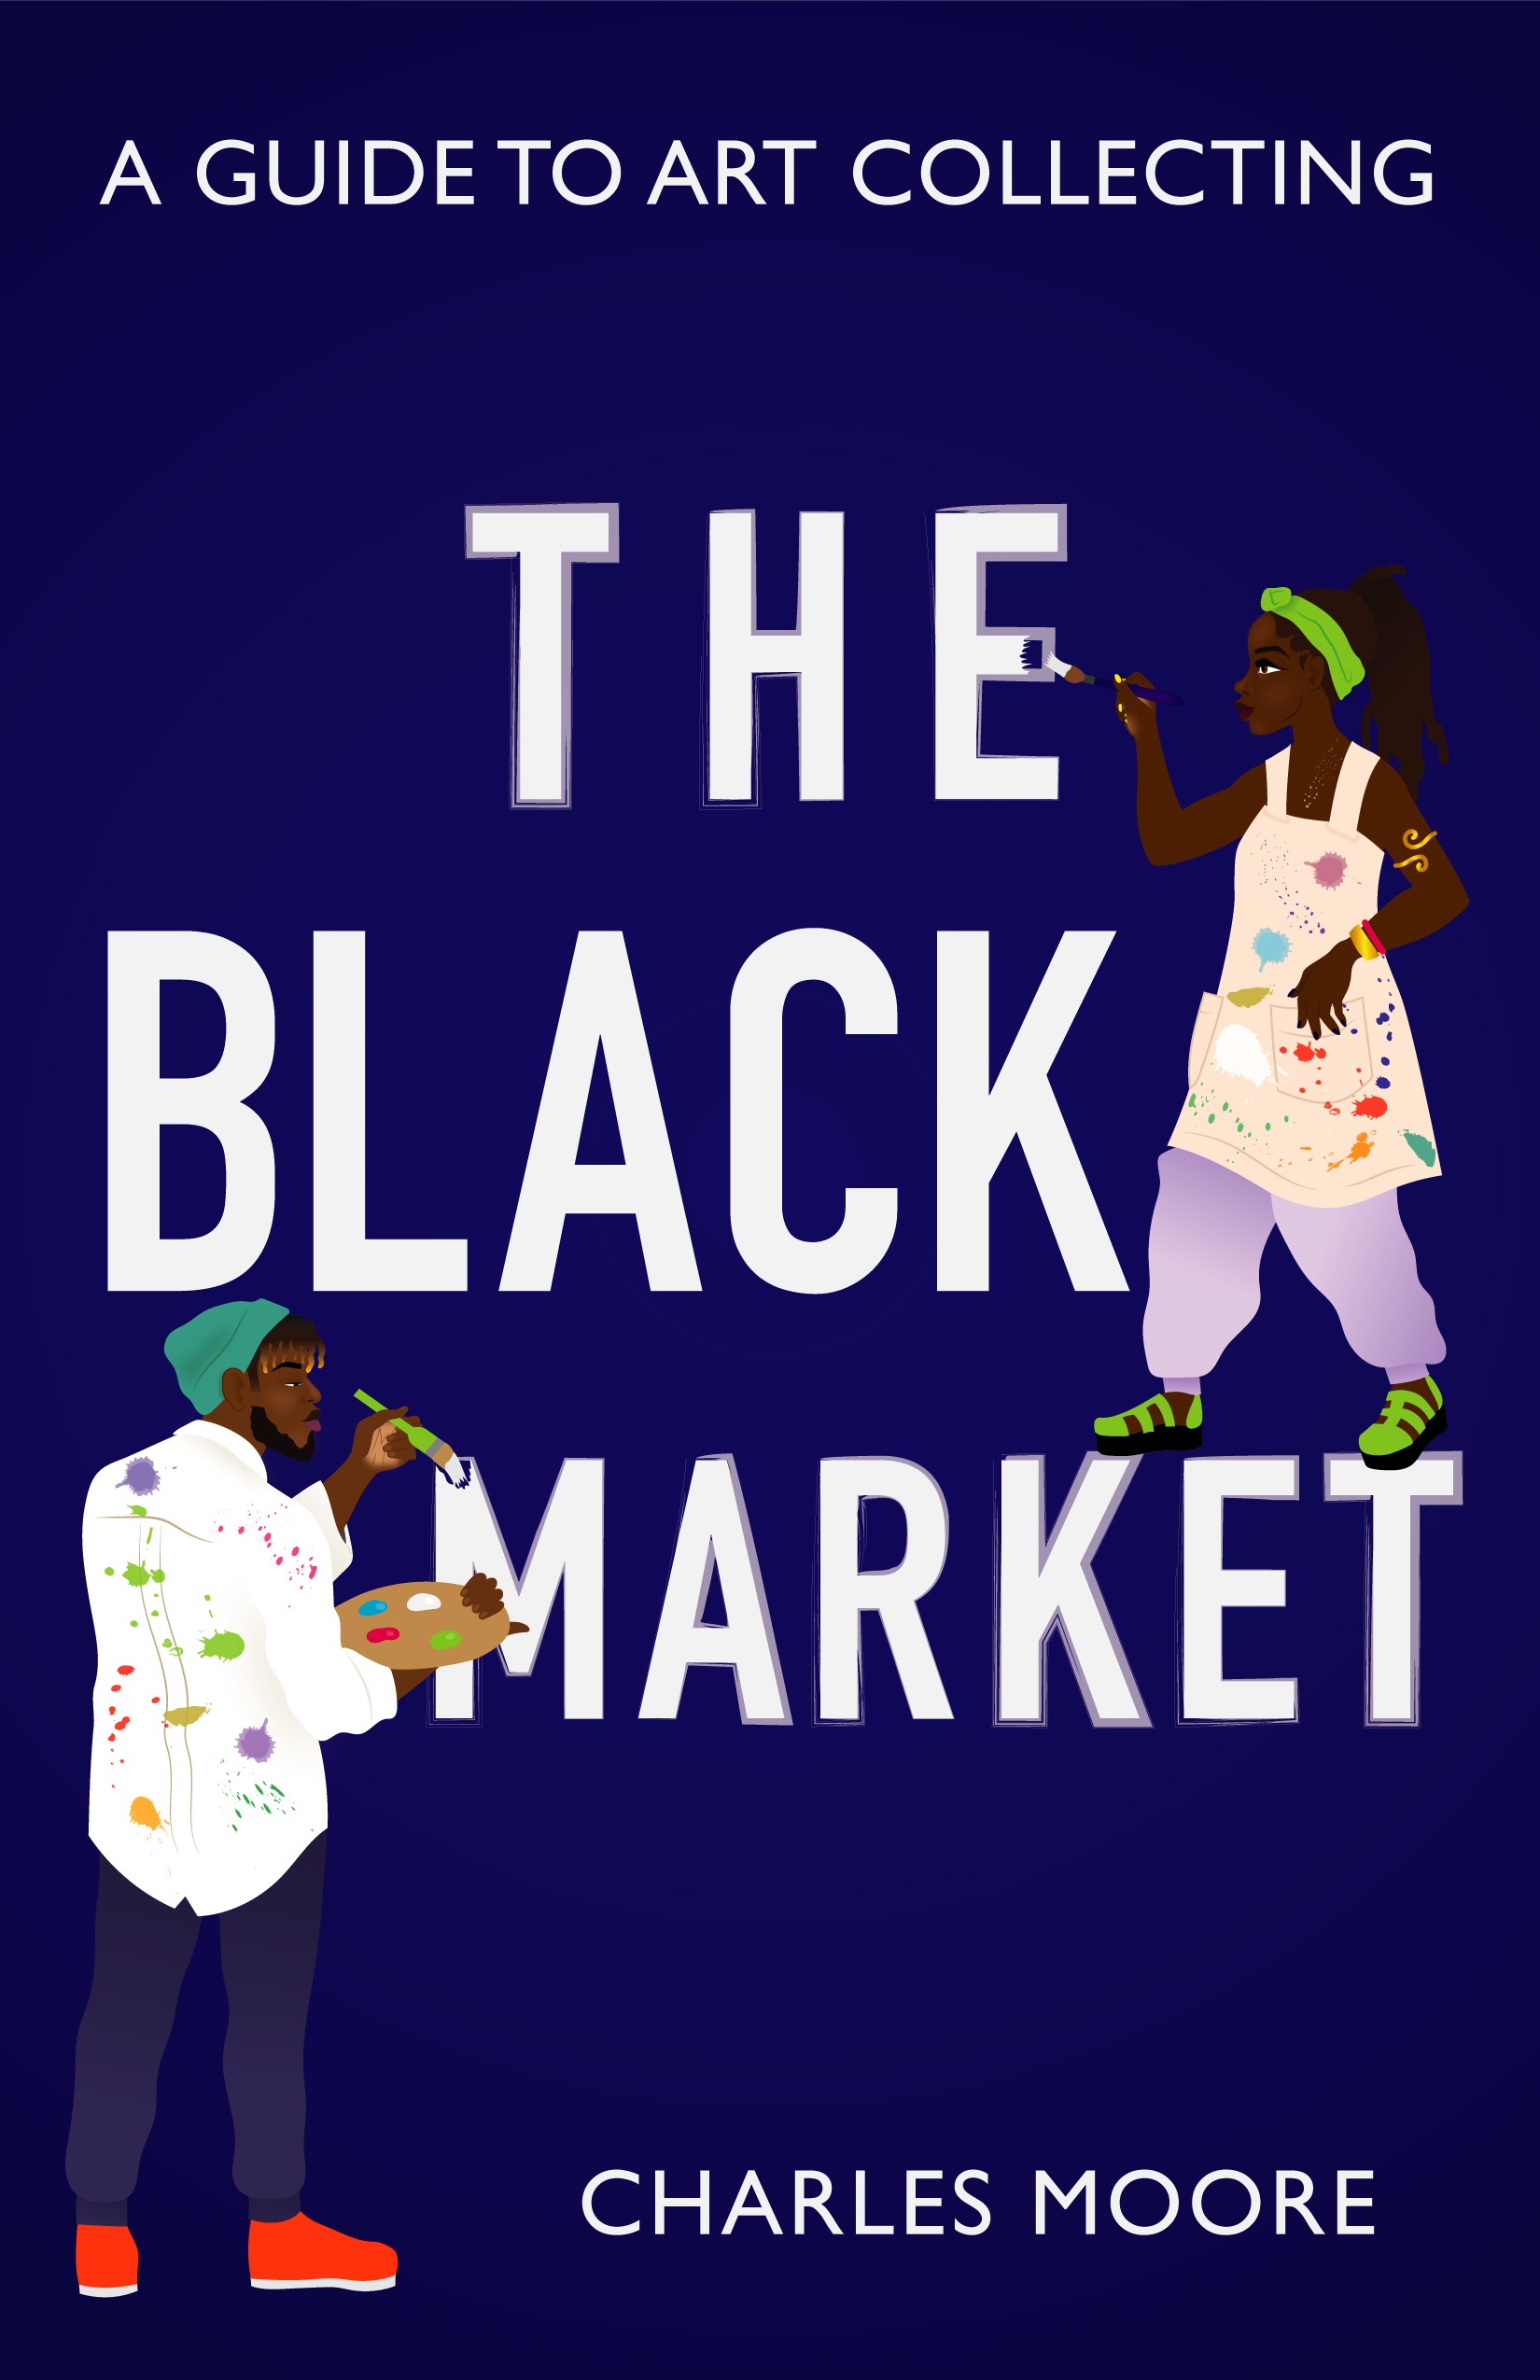 Charles Moore Author & Contemporary Art Expert’s New Book "The Black Market: A Guide to Art Collecting" Available for Pre-Sale